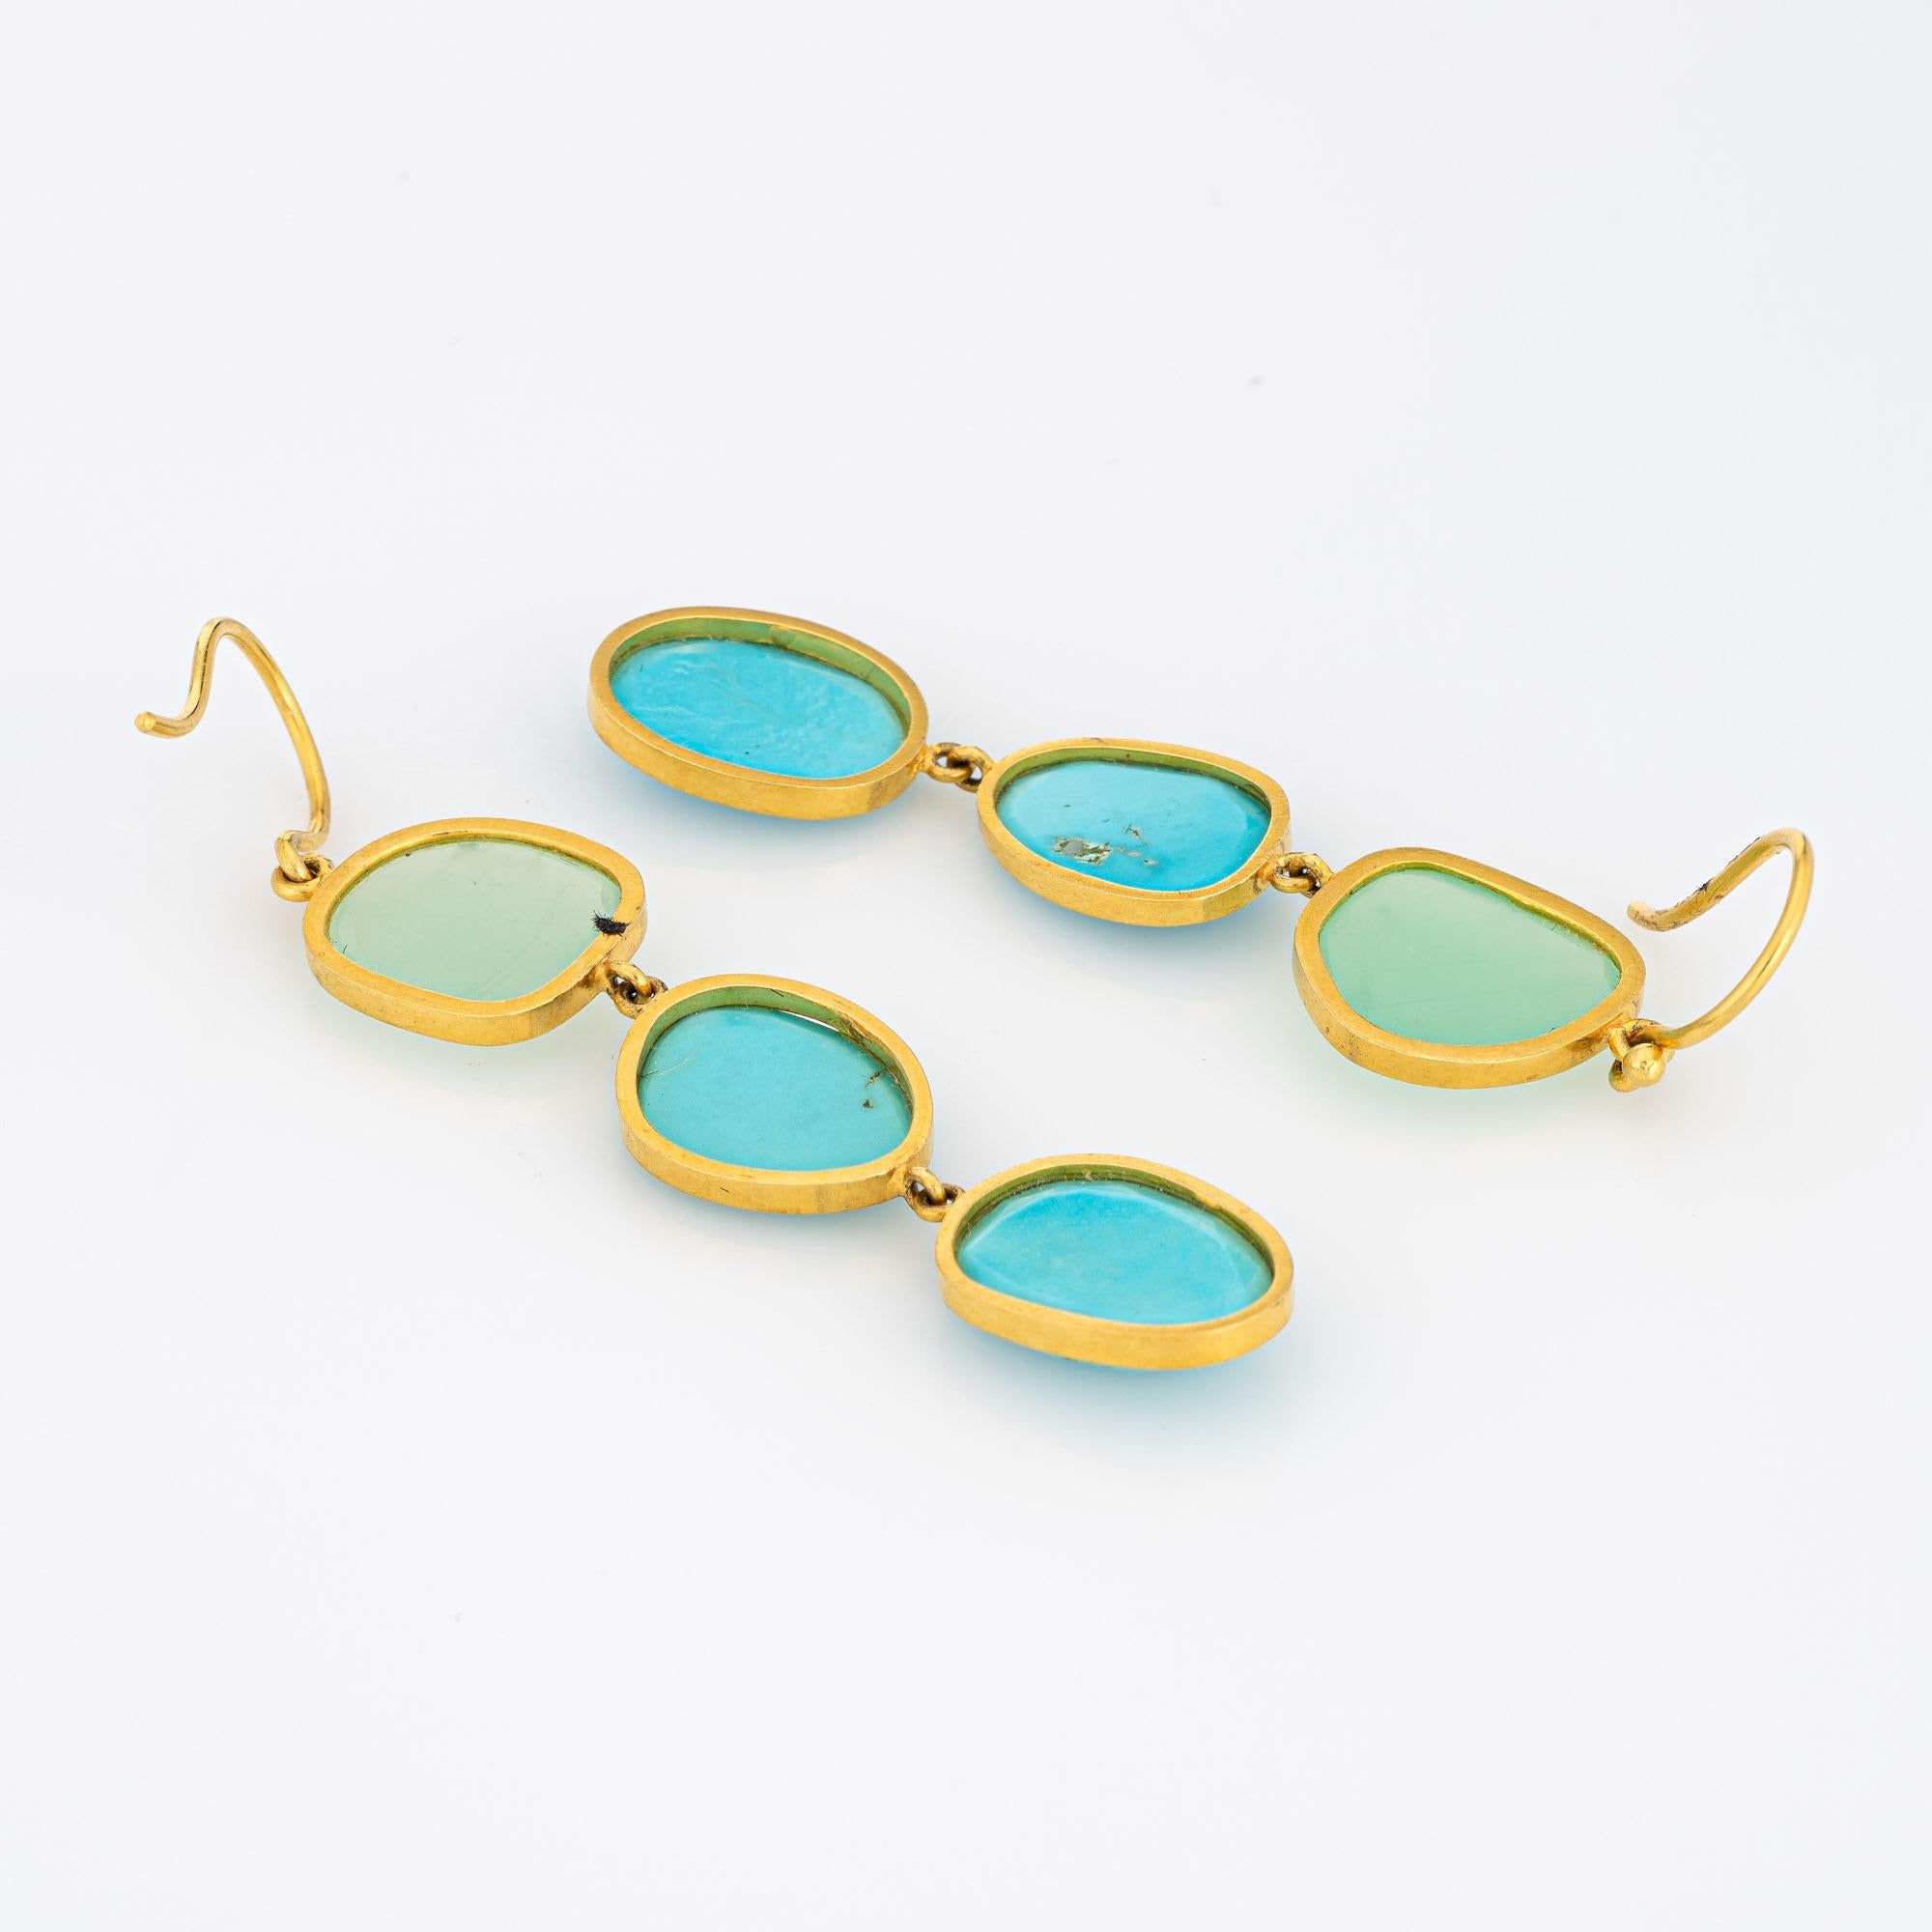 Finely detailed pair of turquoise & green chalcedony drop earrings crafted in 14k yellow gold. 

Turquoise measures 12mm x 10mm (average) and green chalcedony measures 12mm x 11mm. The stones are in very good condition and free of cracks or